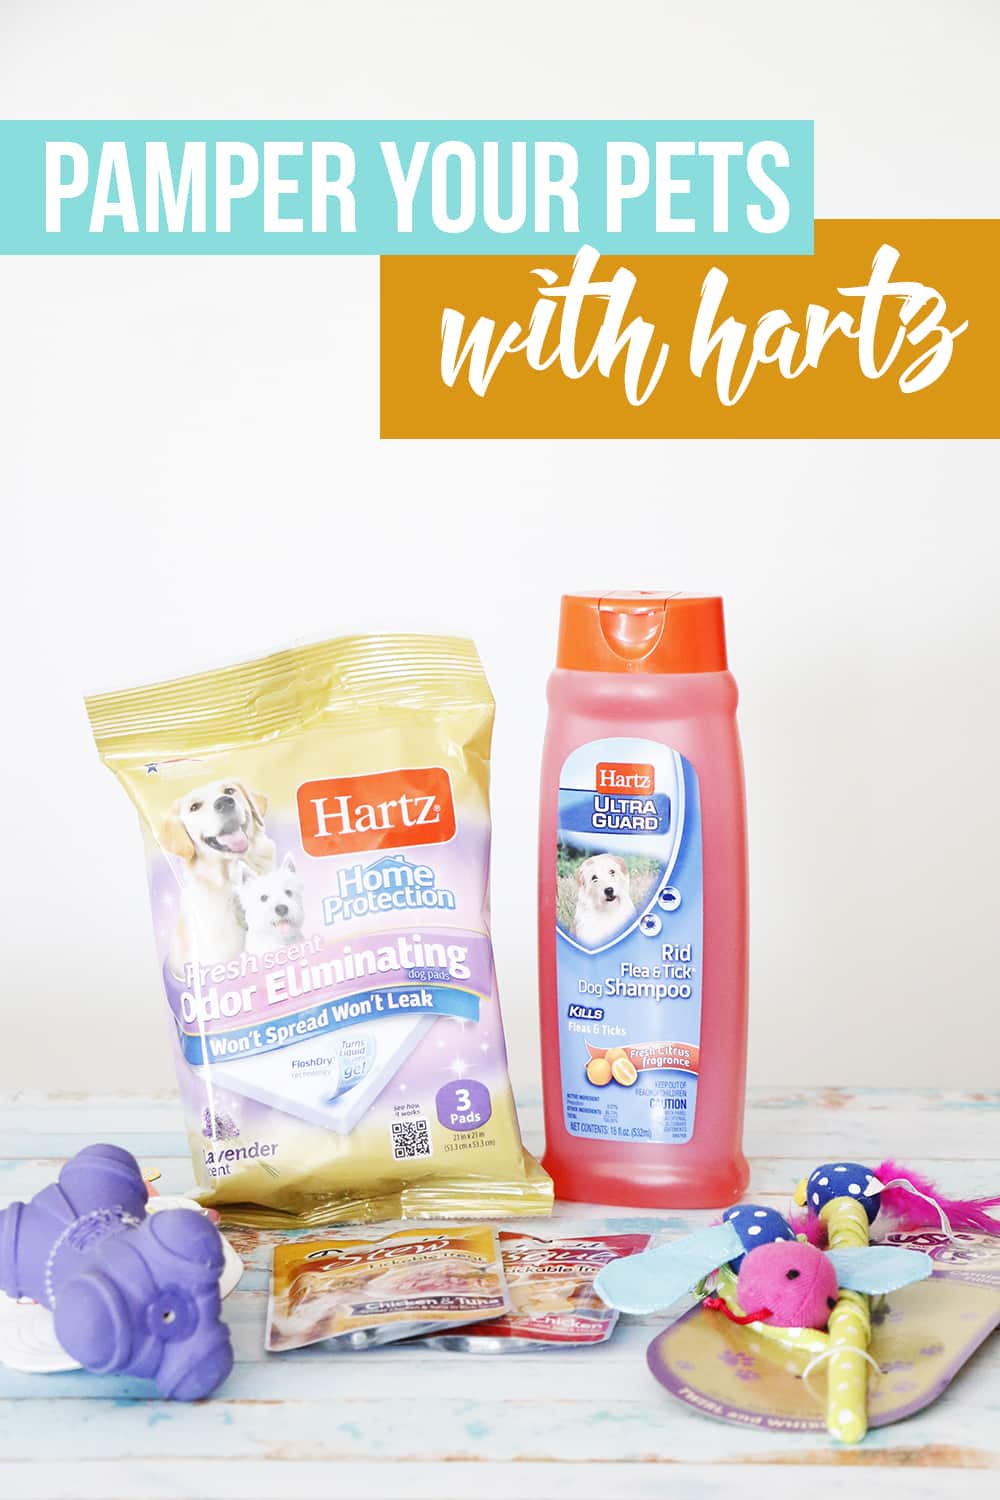 Pamper your pets with Hartz! Treat them with delicious treats, toys, and products that make pet ownership a breeze!